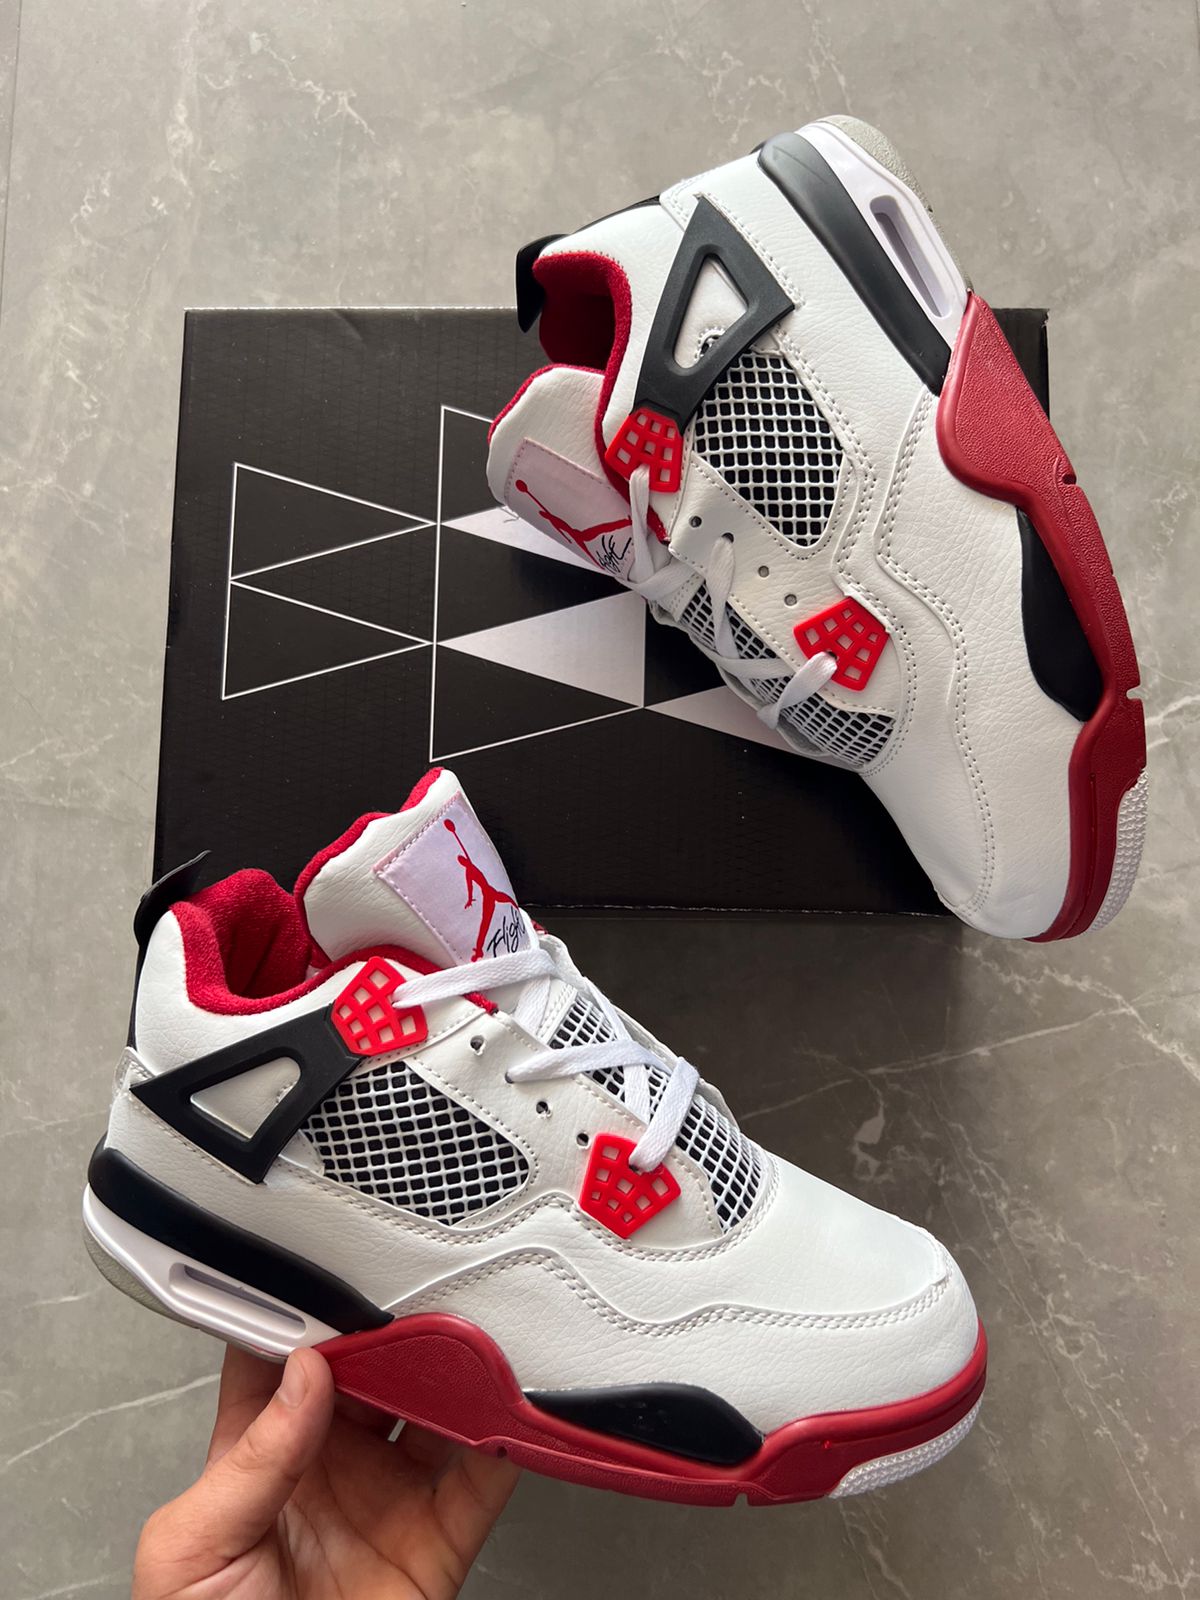 Men's Retro 4 Fire Red Basketball Sneakers